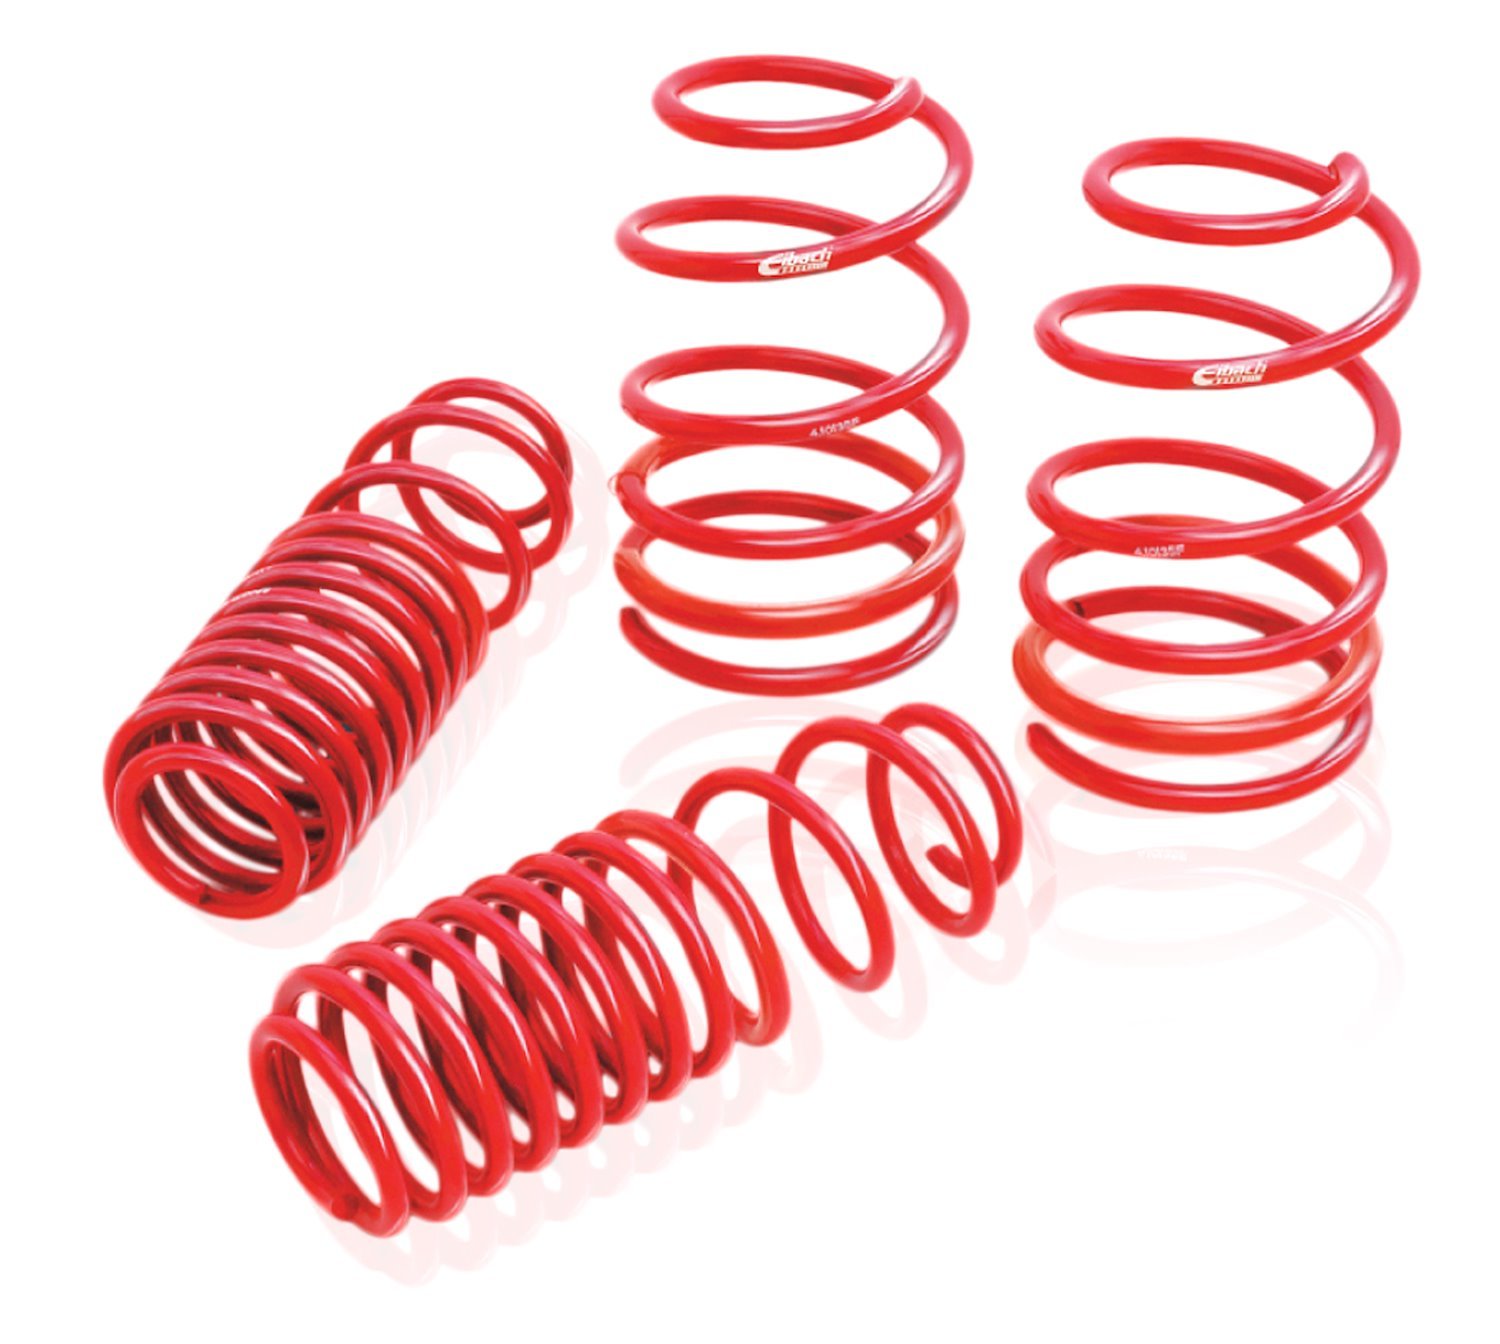 4.4442 Sportline Lowering Springs 2009-16 for Hyundai Genesis Coupe 2.0 Turbo/3.8L - 1.4" Front/1.6" Rear Drop